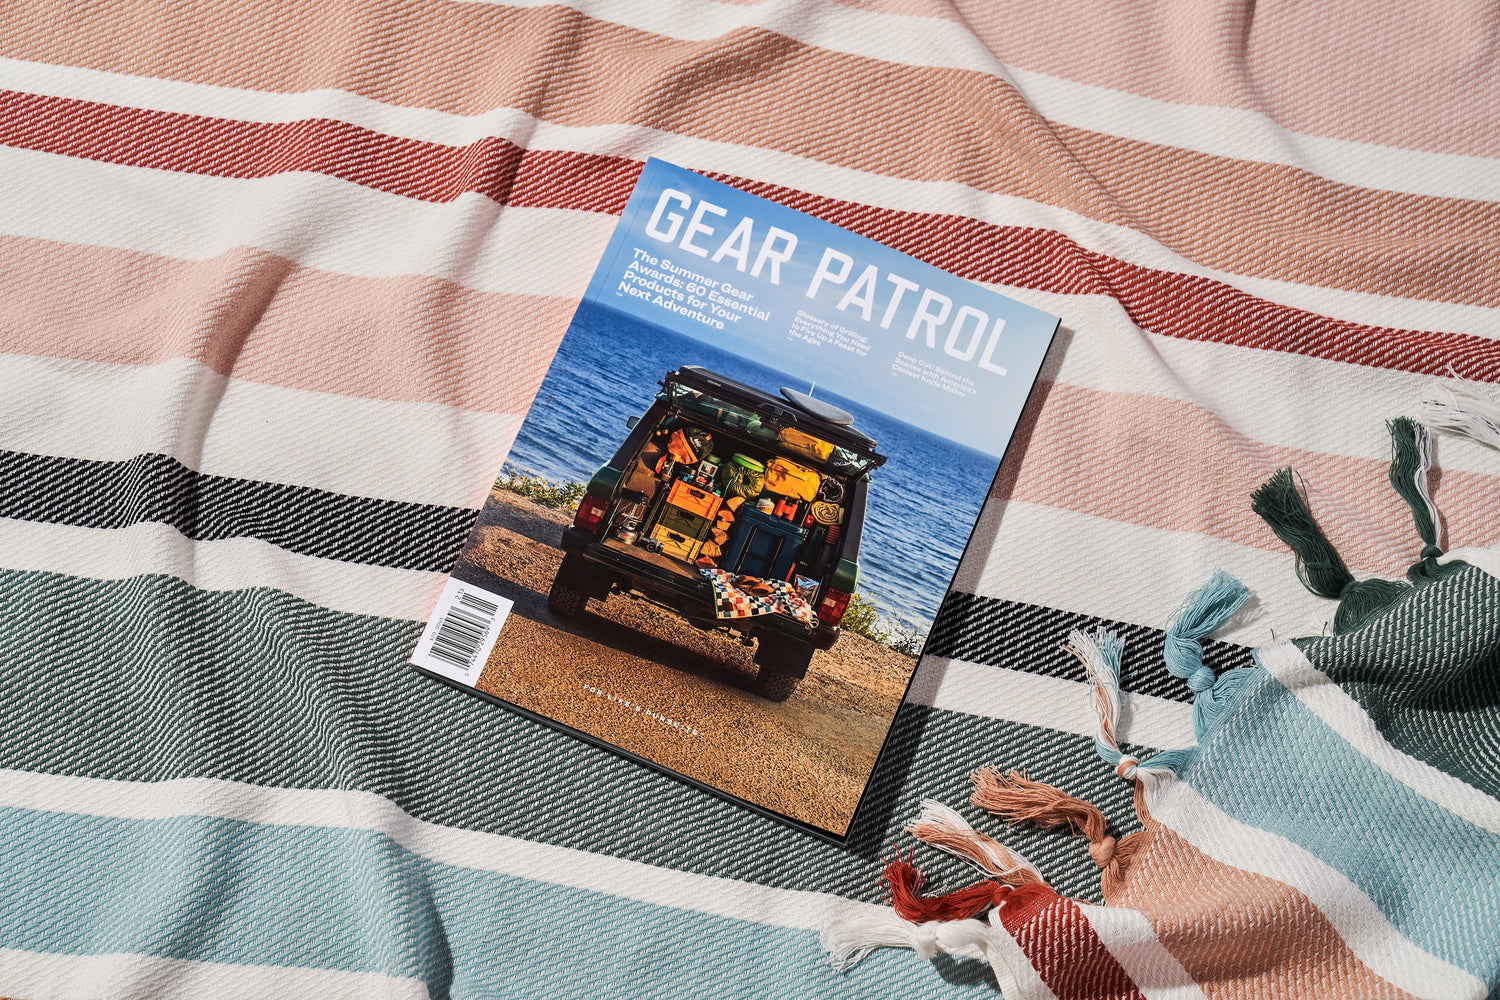 gear patrol magazine, issue eighteen laying on a colorful striped beach blanket